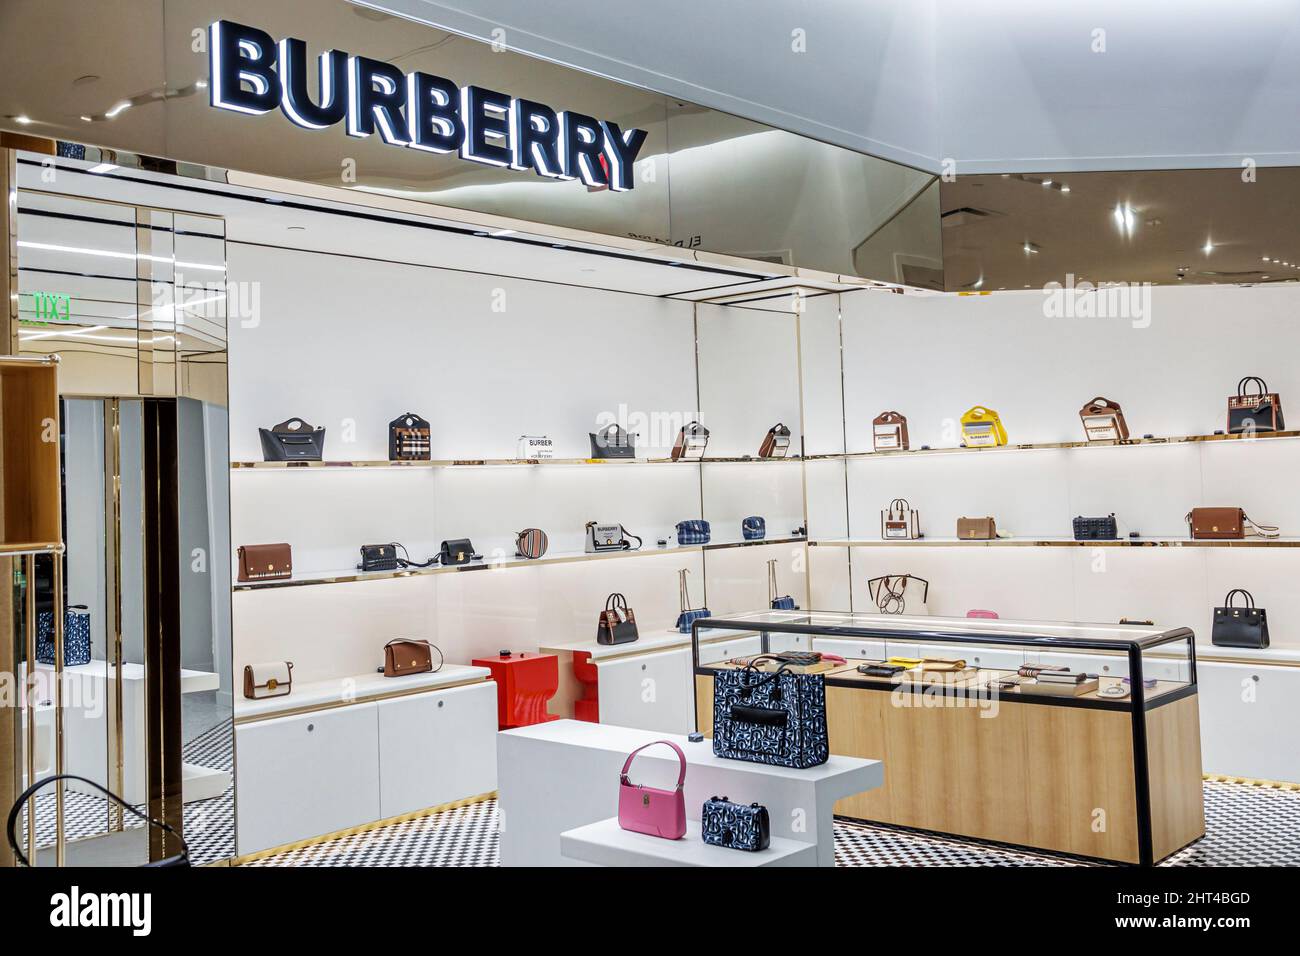 Bal Harbour Florida Bal Harbour Shops upscale luxury designer mall shopping Saks Fifth Avenue department store display sale inside interior Burberry B Stock Photo